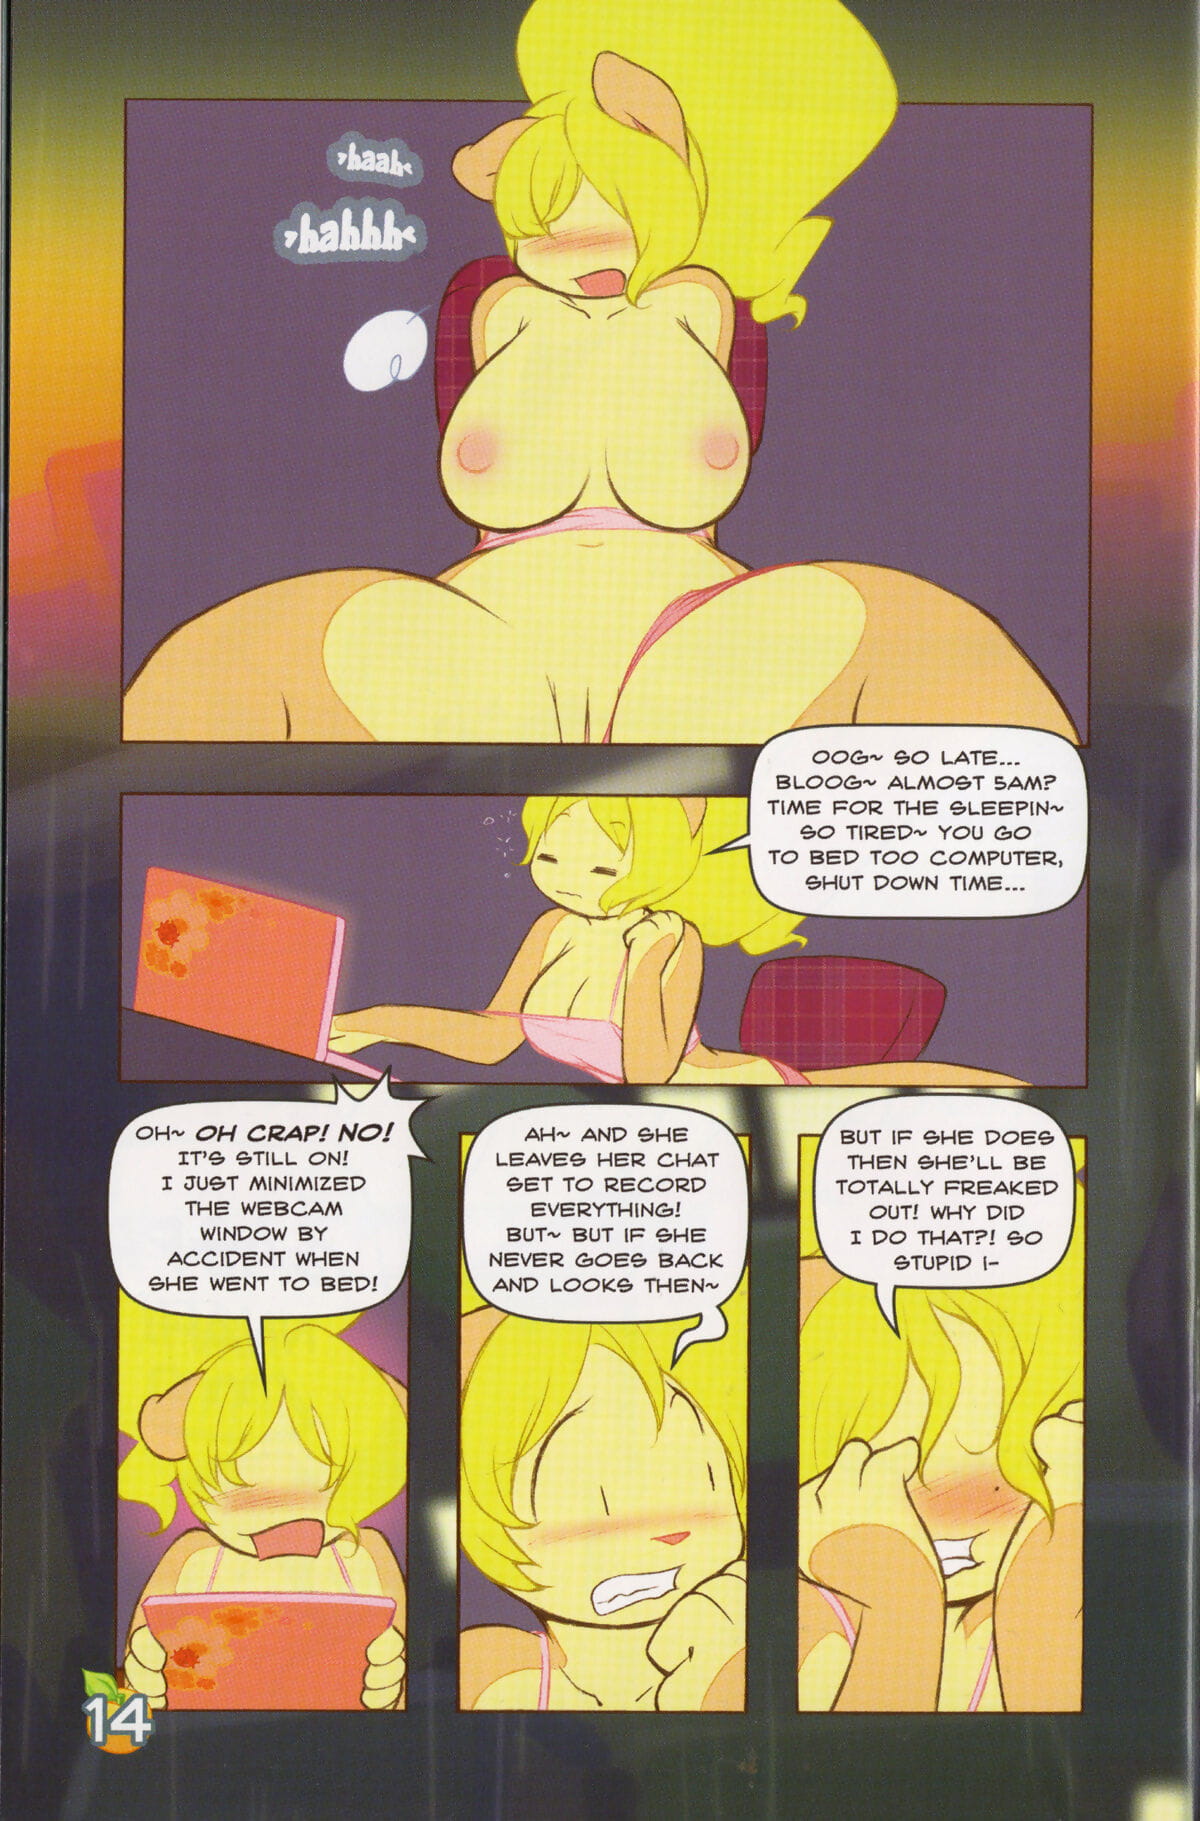 Peaches and Cream: Pillow Talk page 1